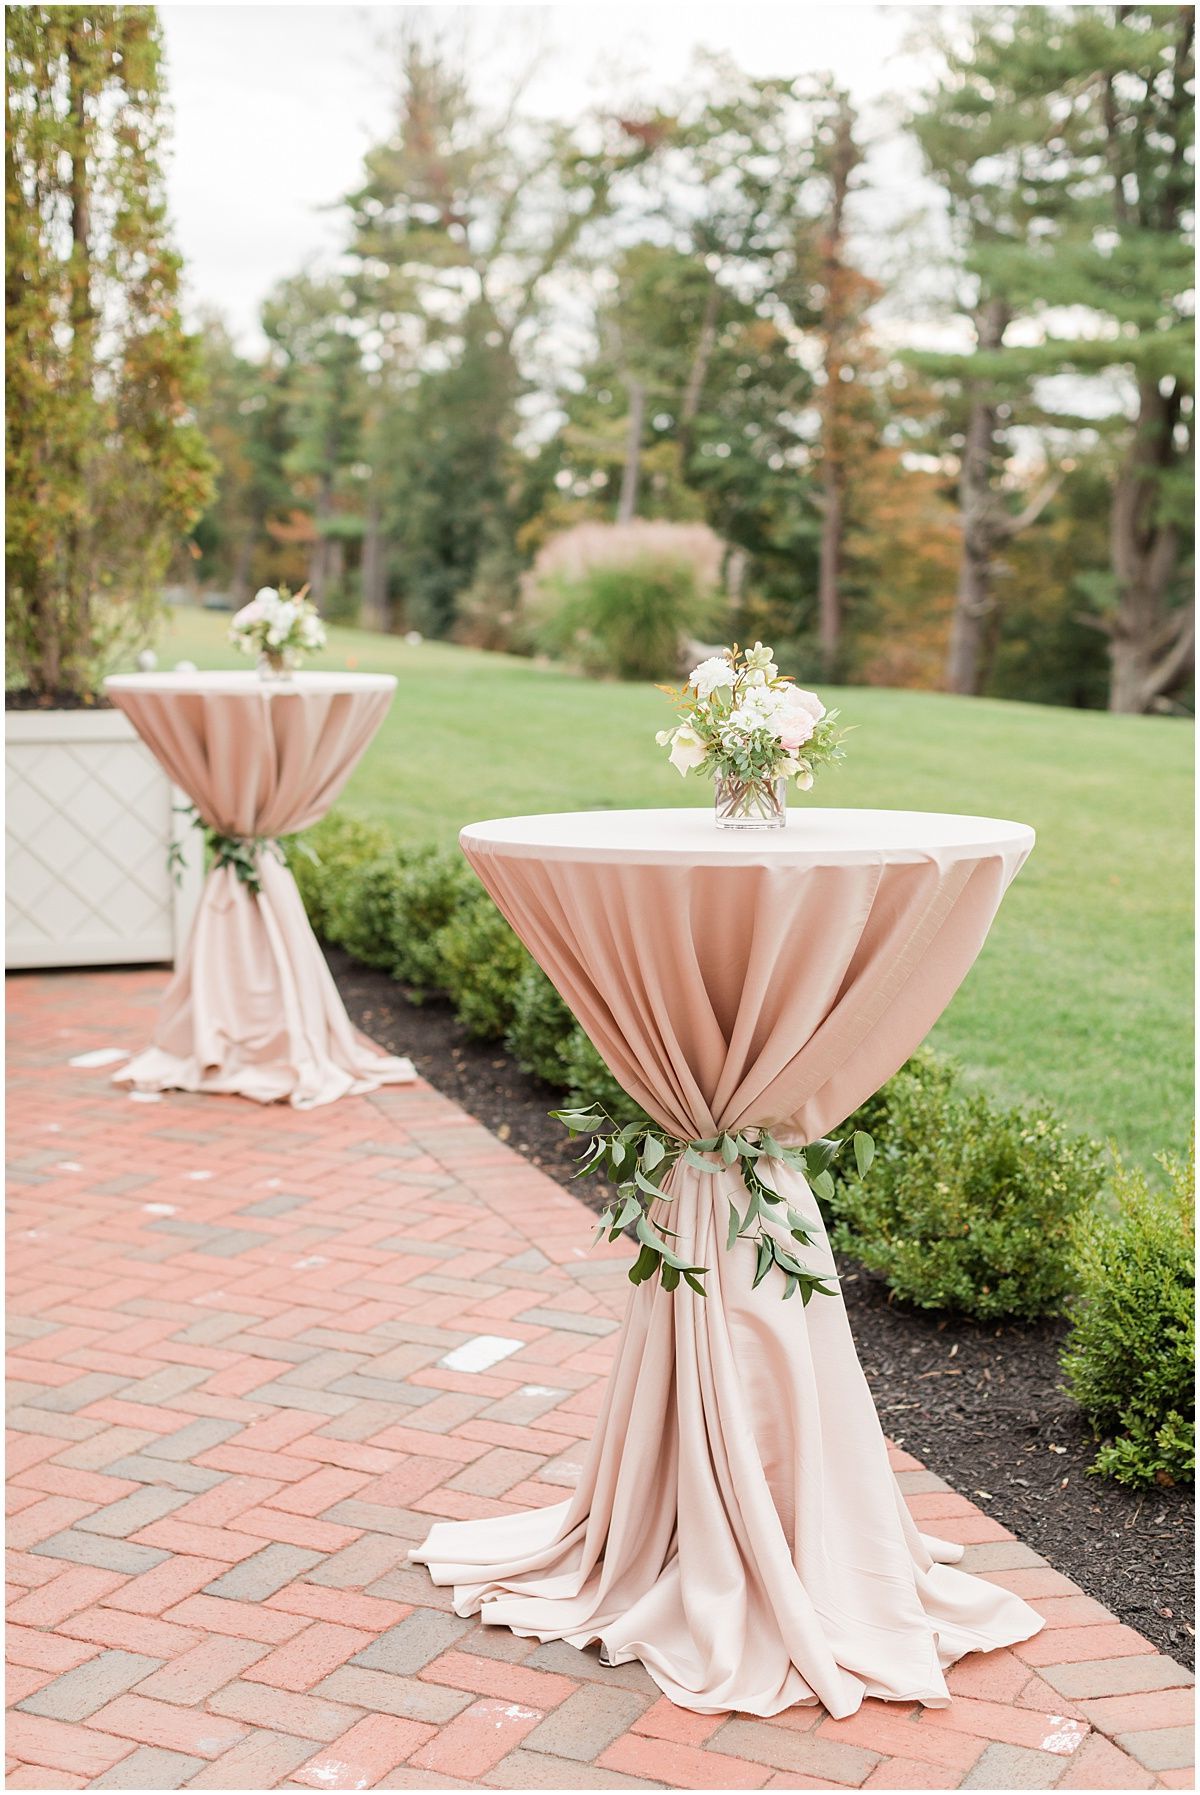 Outdoor Wedding Cocktail Hour | Natirar Mansion | Nj Wedding | Cocktail Pertaining To Natural Outdoor Cocktail Tables (Gallery 5 of 20)